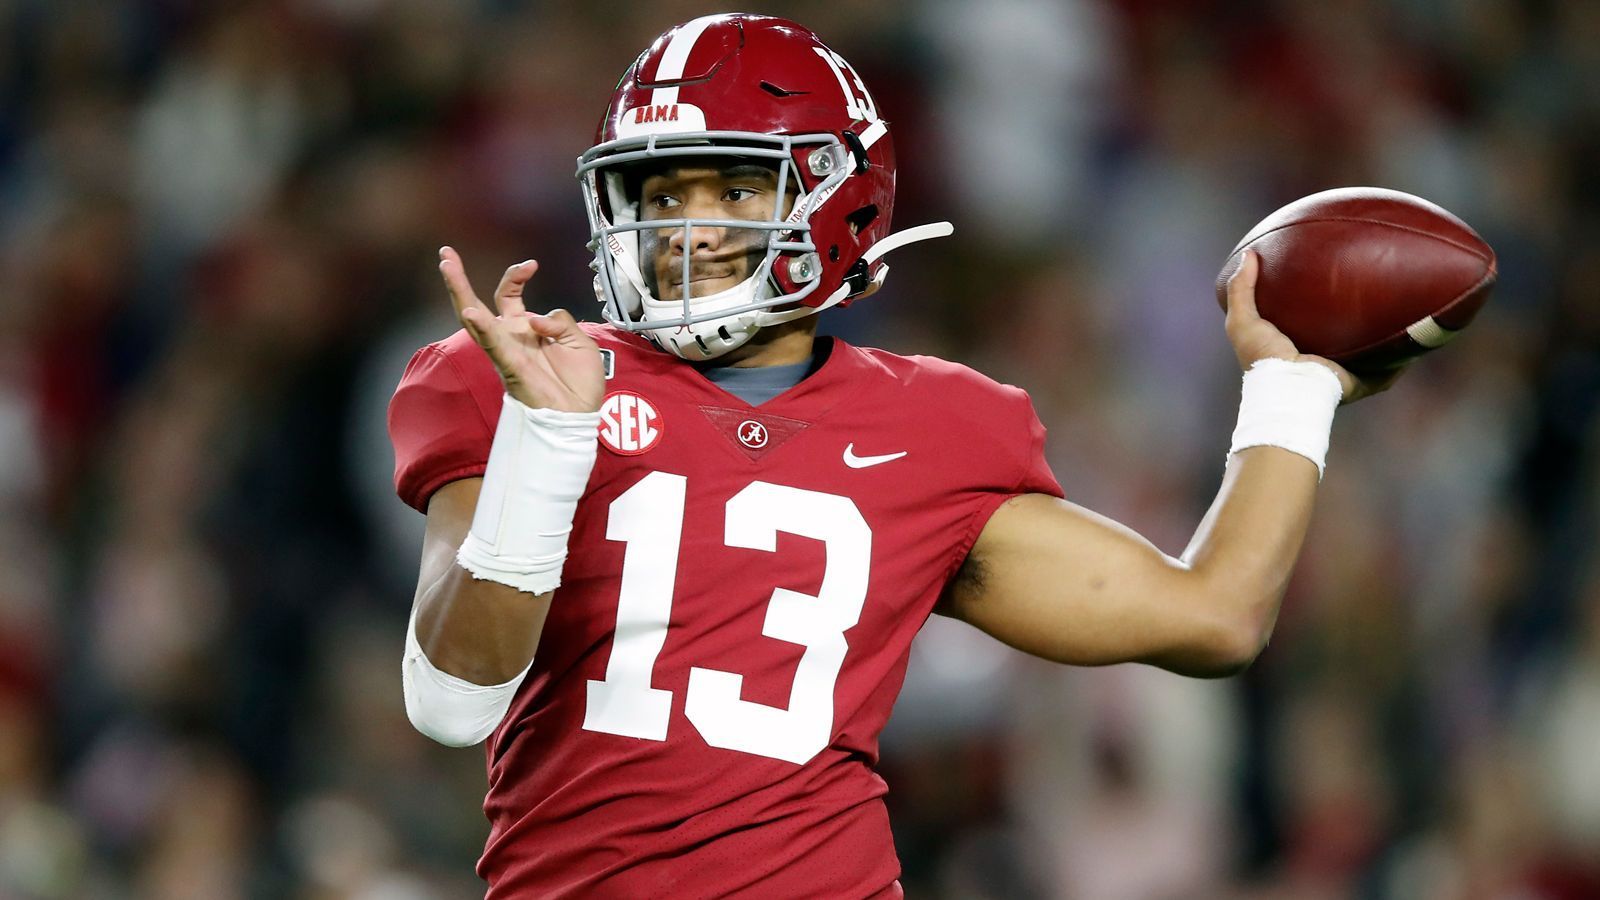 
                <strong>University of Alabama (4 First-Round-Picks)</strong><br>
                Tua Tagovailoa (Bild; Miami Dolphins/Quarterback)Jedrick Wills (Cleveland Browns/Offensive Tackle)Henry Ruggs (Las Vegas Raiders/Wide Receiver)Jerry Jeudy (Denver Broncos/Wide Reiceiver)
              